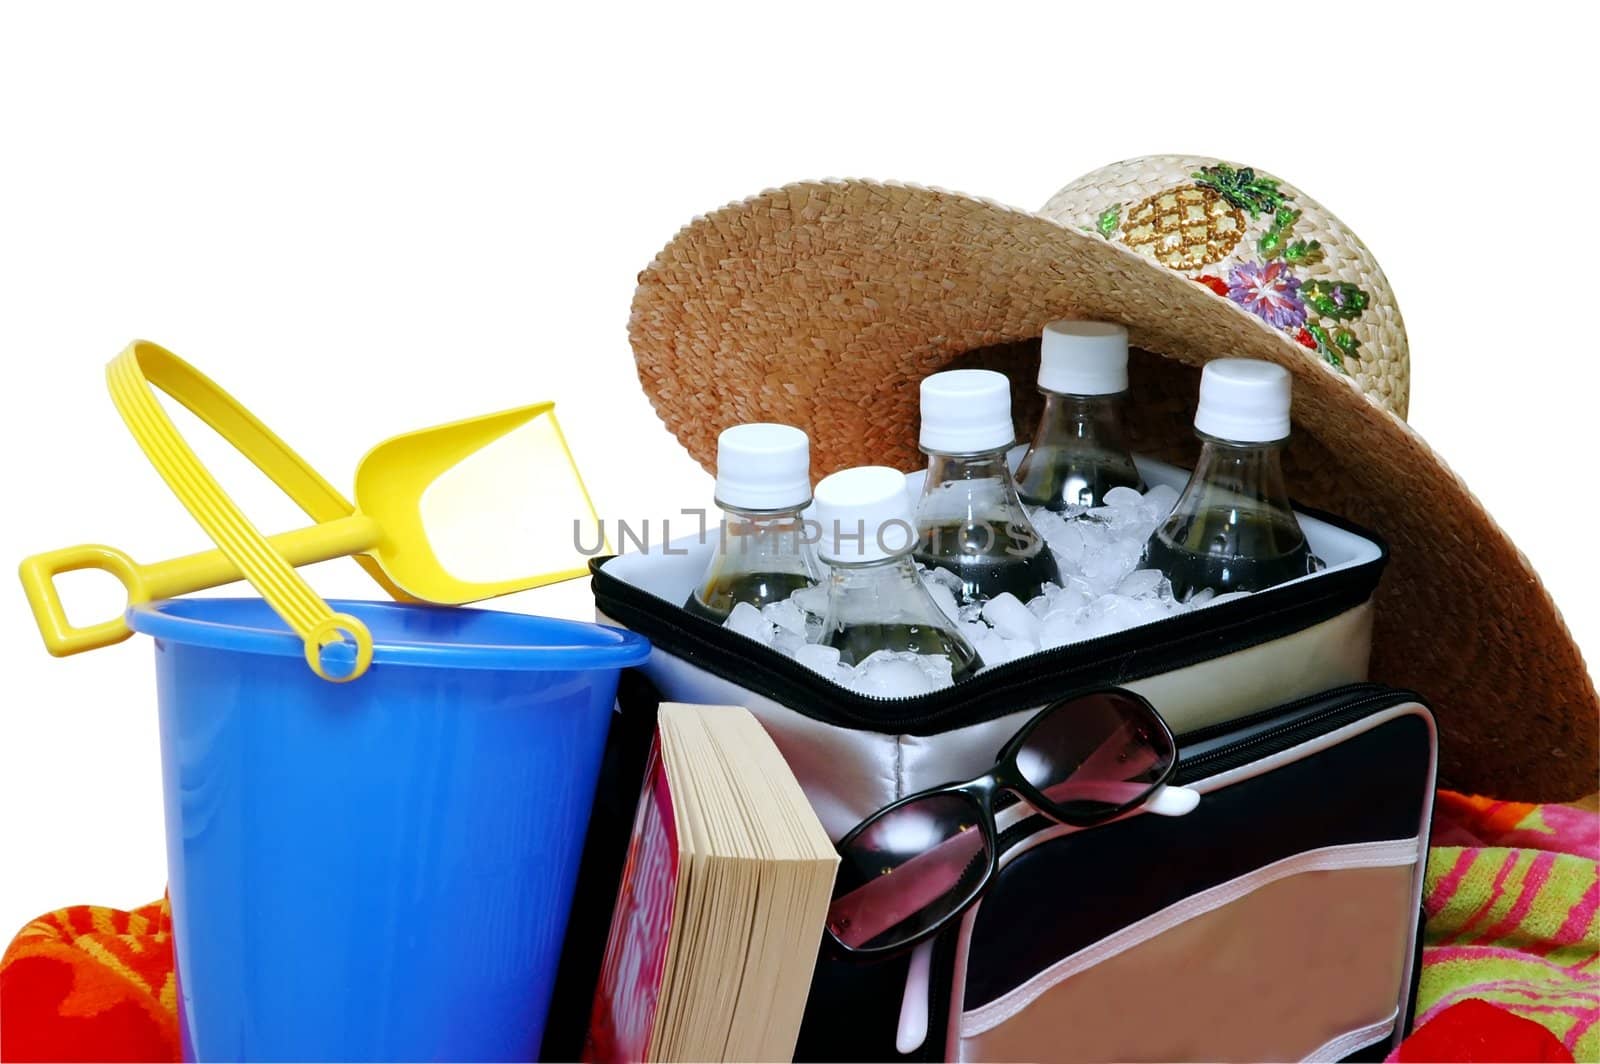 Beach items.  Sun hat, cooler, drinks,sunglasses, book, and sand pail with shovel. Isolated with clipping path.